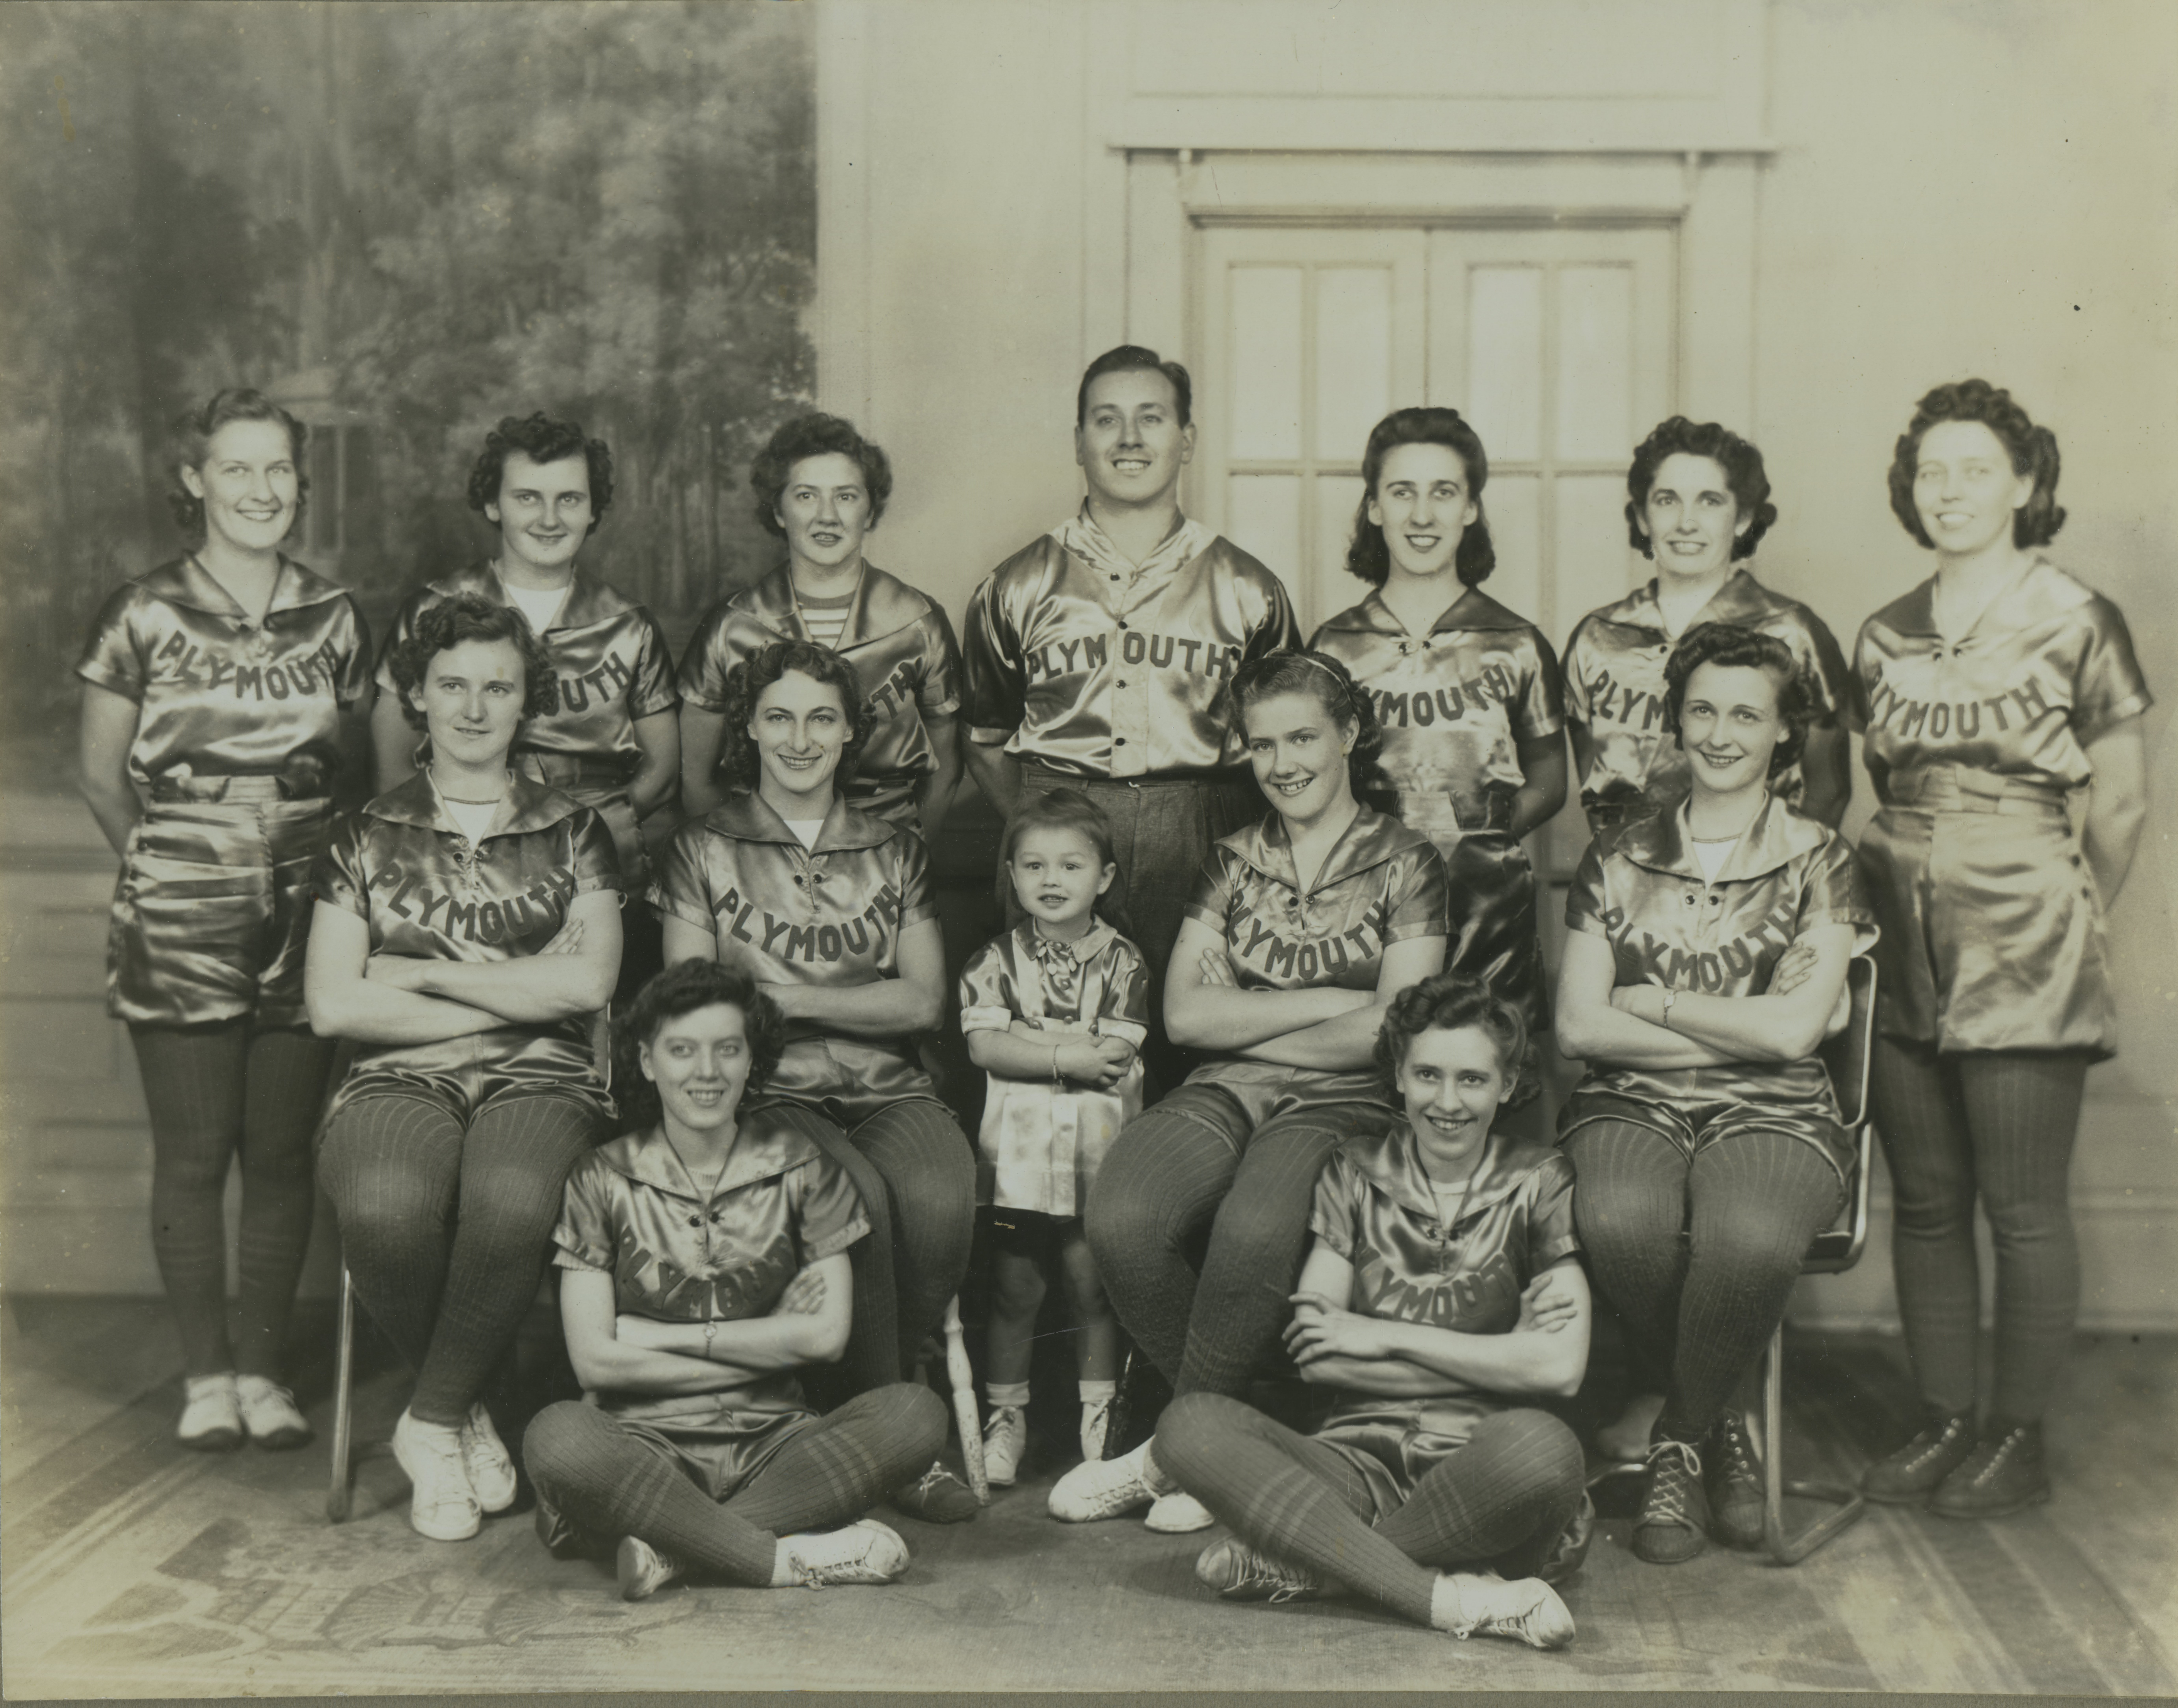 A group of women, one man, and one small girl pose for a photo together in their Plymouth softball jerseys.